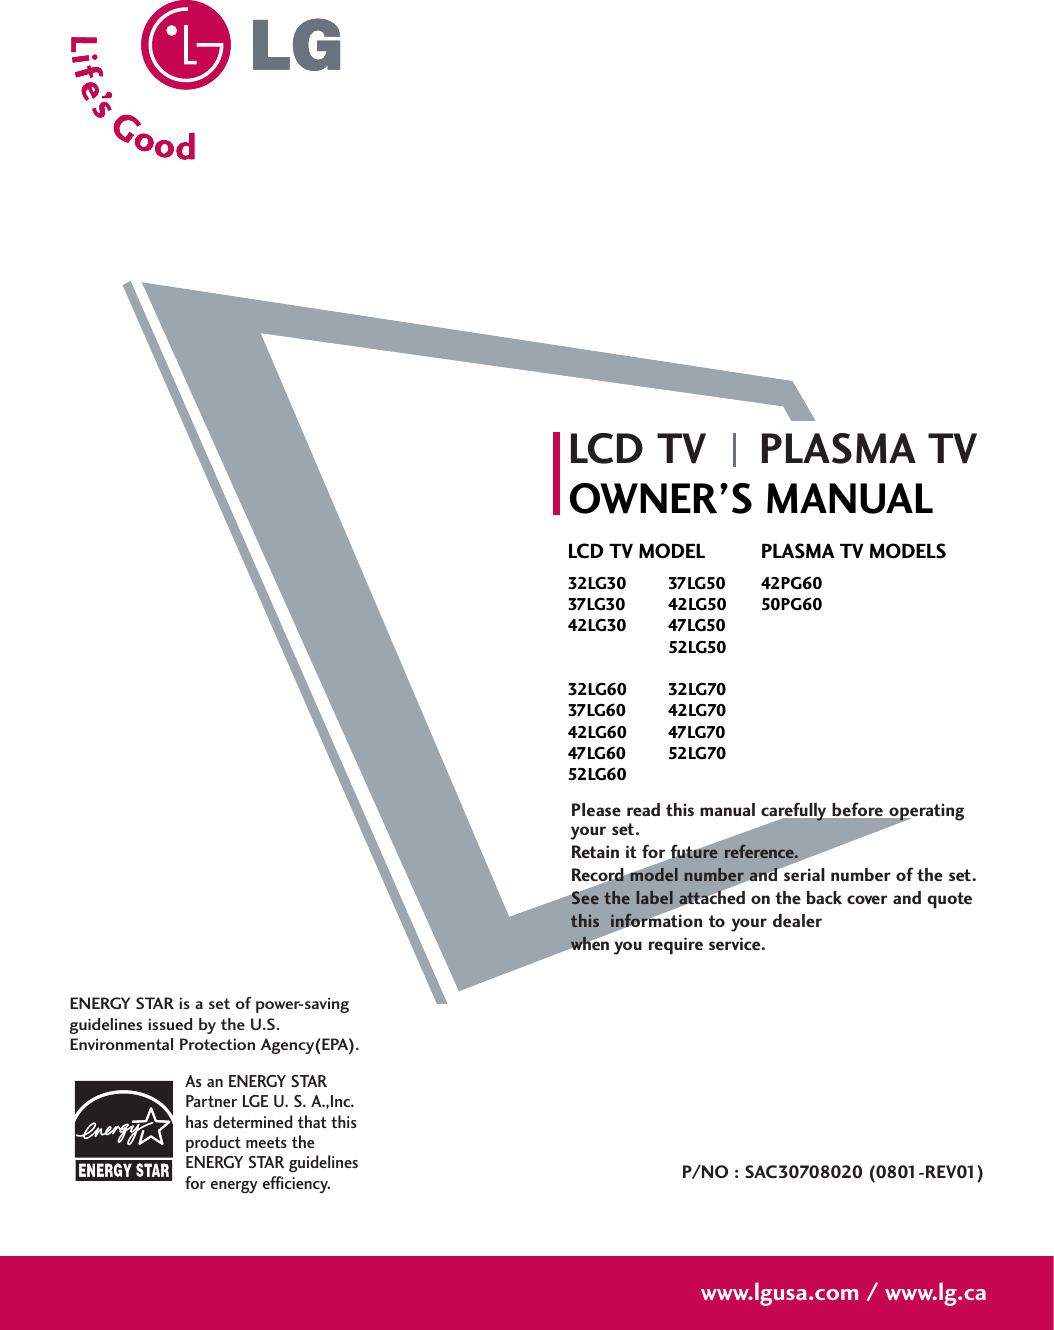 Please read this manual carefully before operatingyour set. Retain it for future reference.Record model number and serial number of the set. See the label attached on the back cover and quote this  information to your dealer when you require service.LCD TV PLASMA TVOWNER’S MANUALLCD TV MODEL32LG30 37LG5037LG30 42LG5042LG30 47LG5052LG5032LG60 32LG7037LG60 42LG7042LG60 47LG7047LG60 52LG7052LG60PLASMA TV MODELS42PG6050PG60P/NO : SAC30708020 (0801-REV01)www.lgusa.com / www.lg.caAs an ENERGY STARPartner LGE U. S. A.,Inc.has determined that thisproduct meets theENERGY STAR guidelinesfor energy efficiency.ENERGY STAR is a set of power-savingguidelines issued by the U.S.Environmental Protection Agency(EPA).